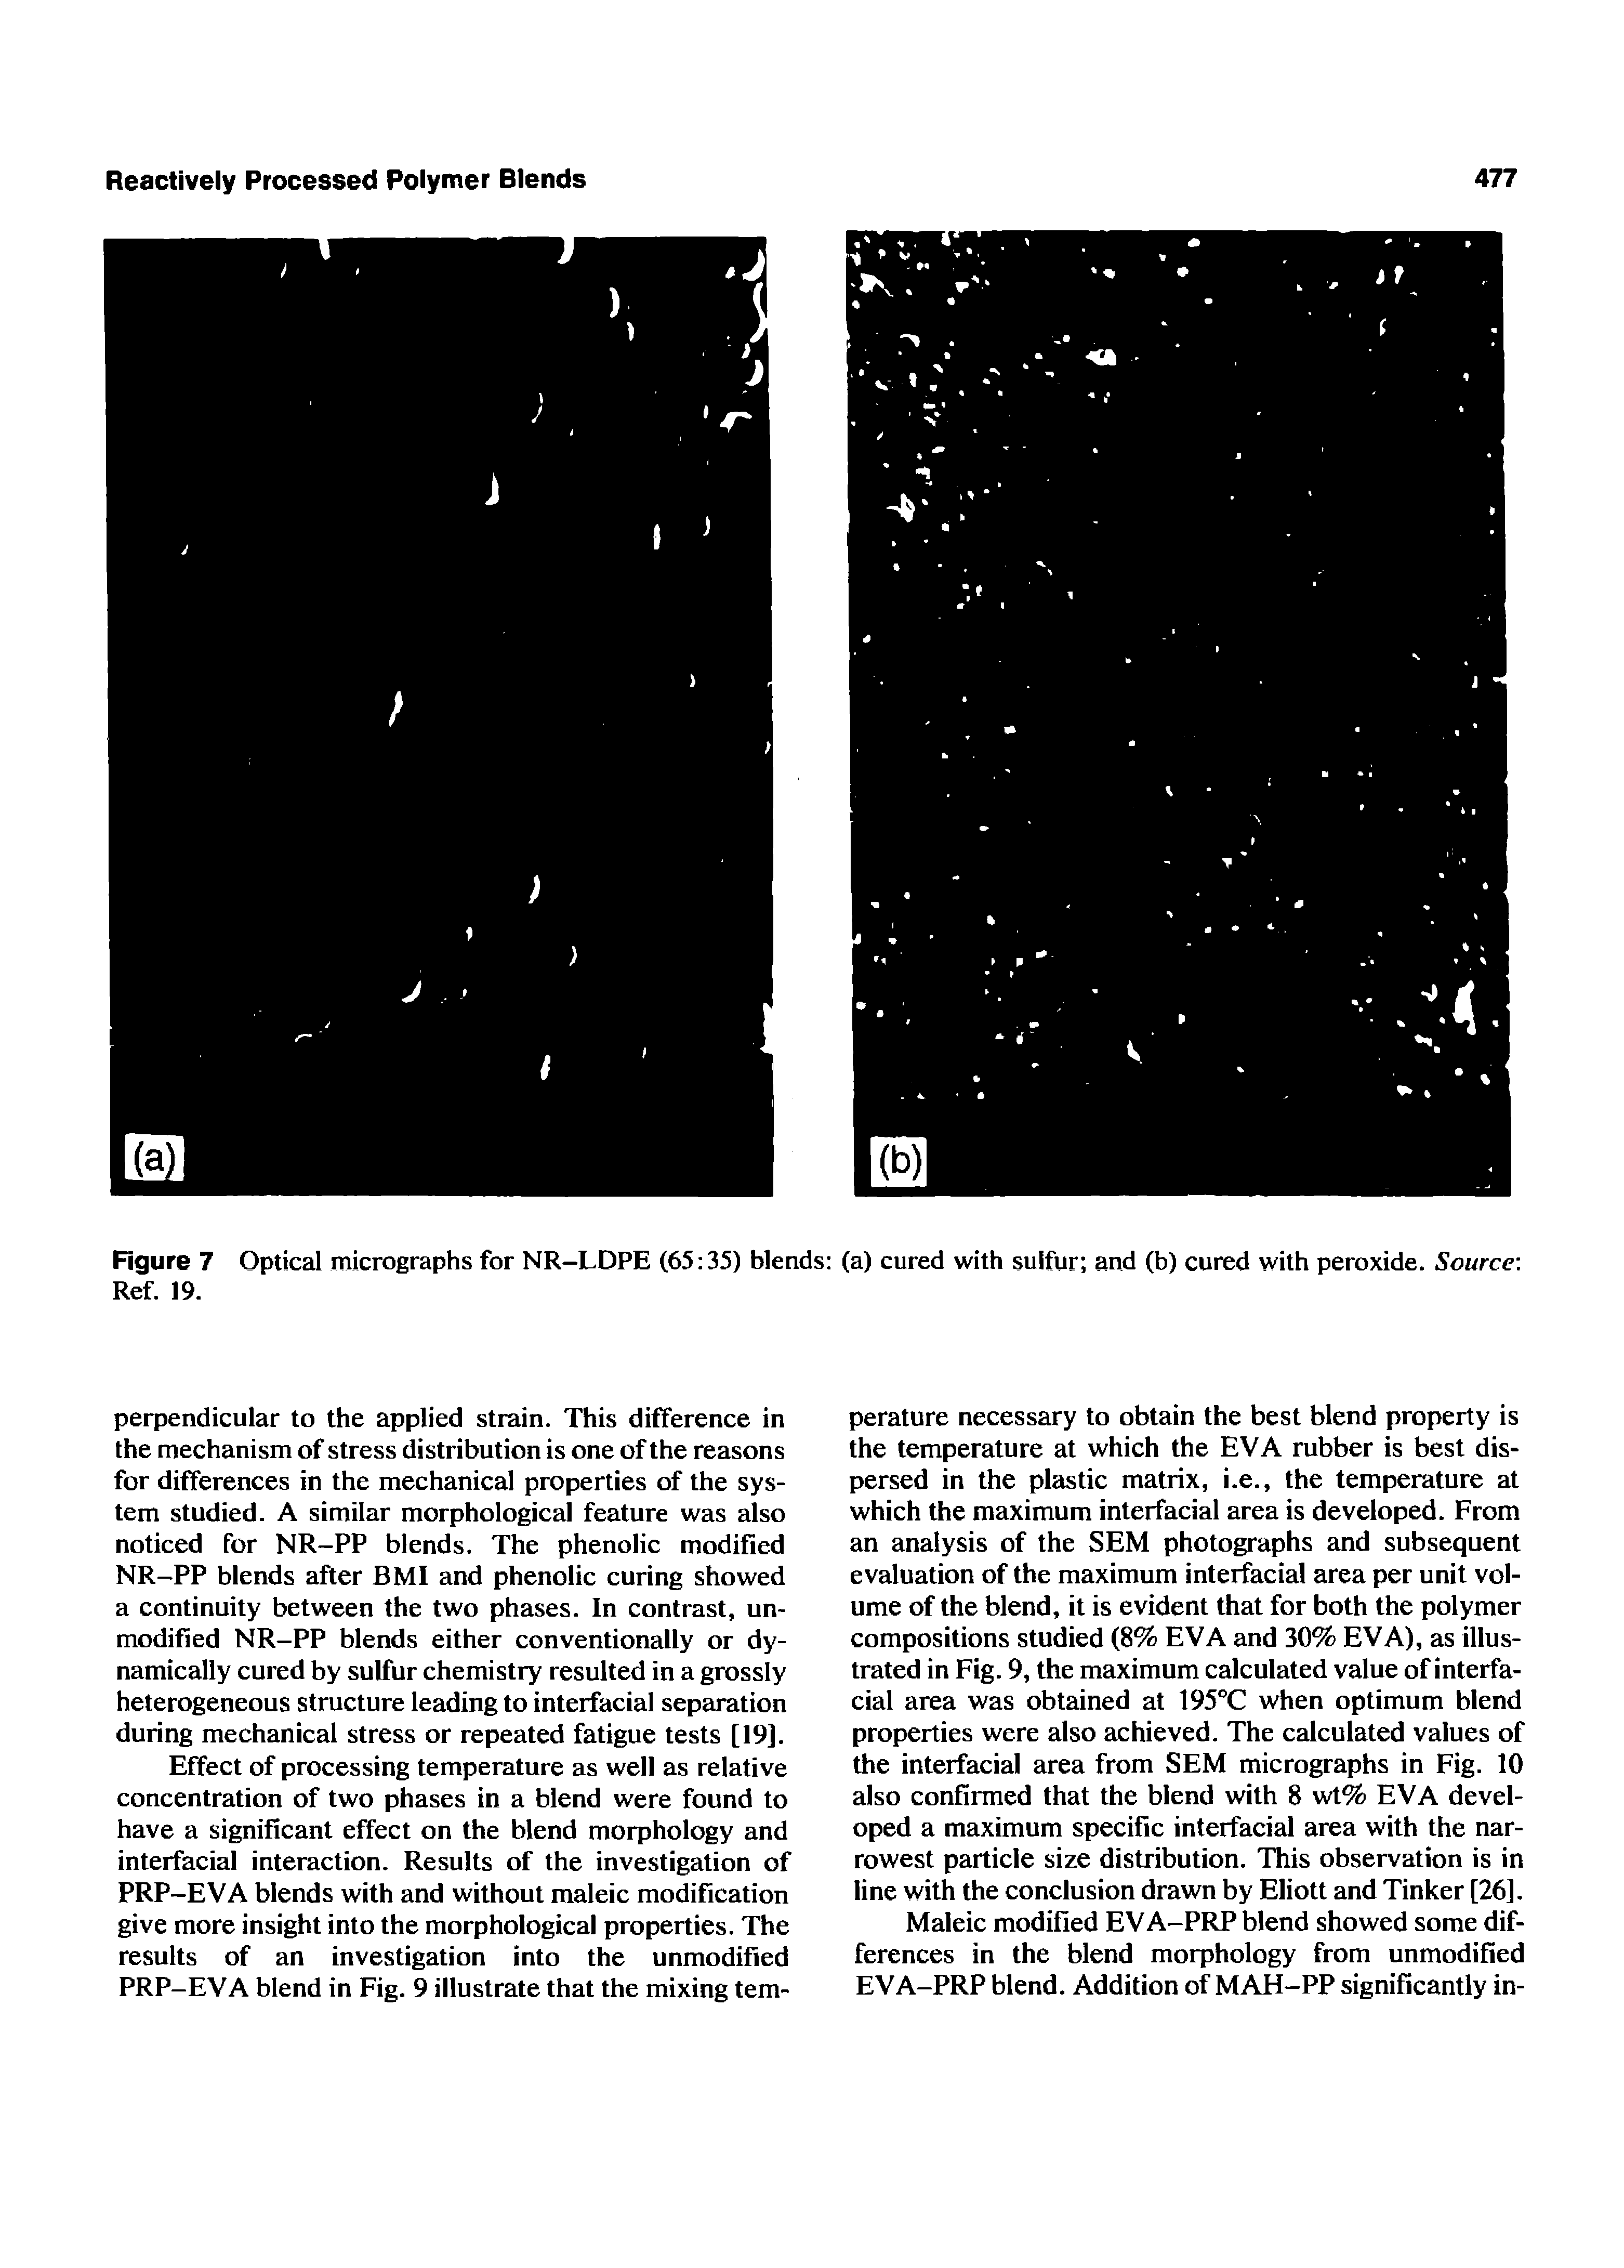 Figure 7 Optical micrographs for NR-LDPE (65 35) blends (a) cured with sulfur and (b) cured with peroxide. Source Ref. 19.